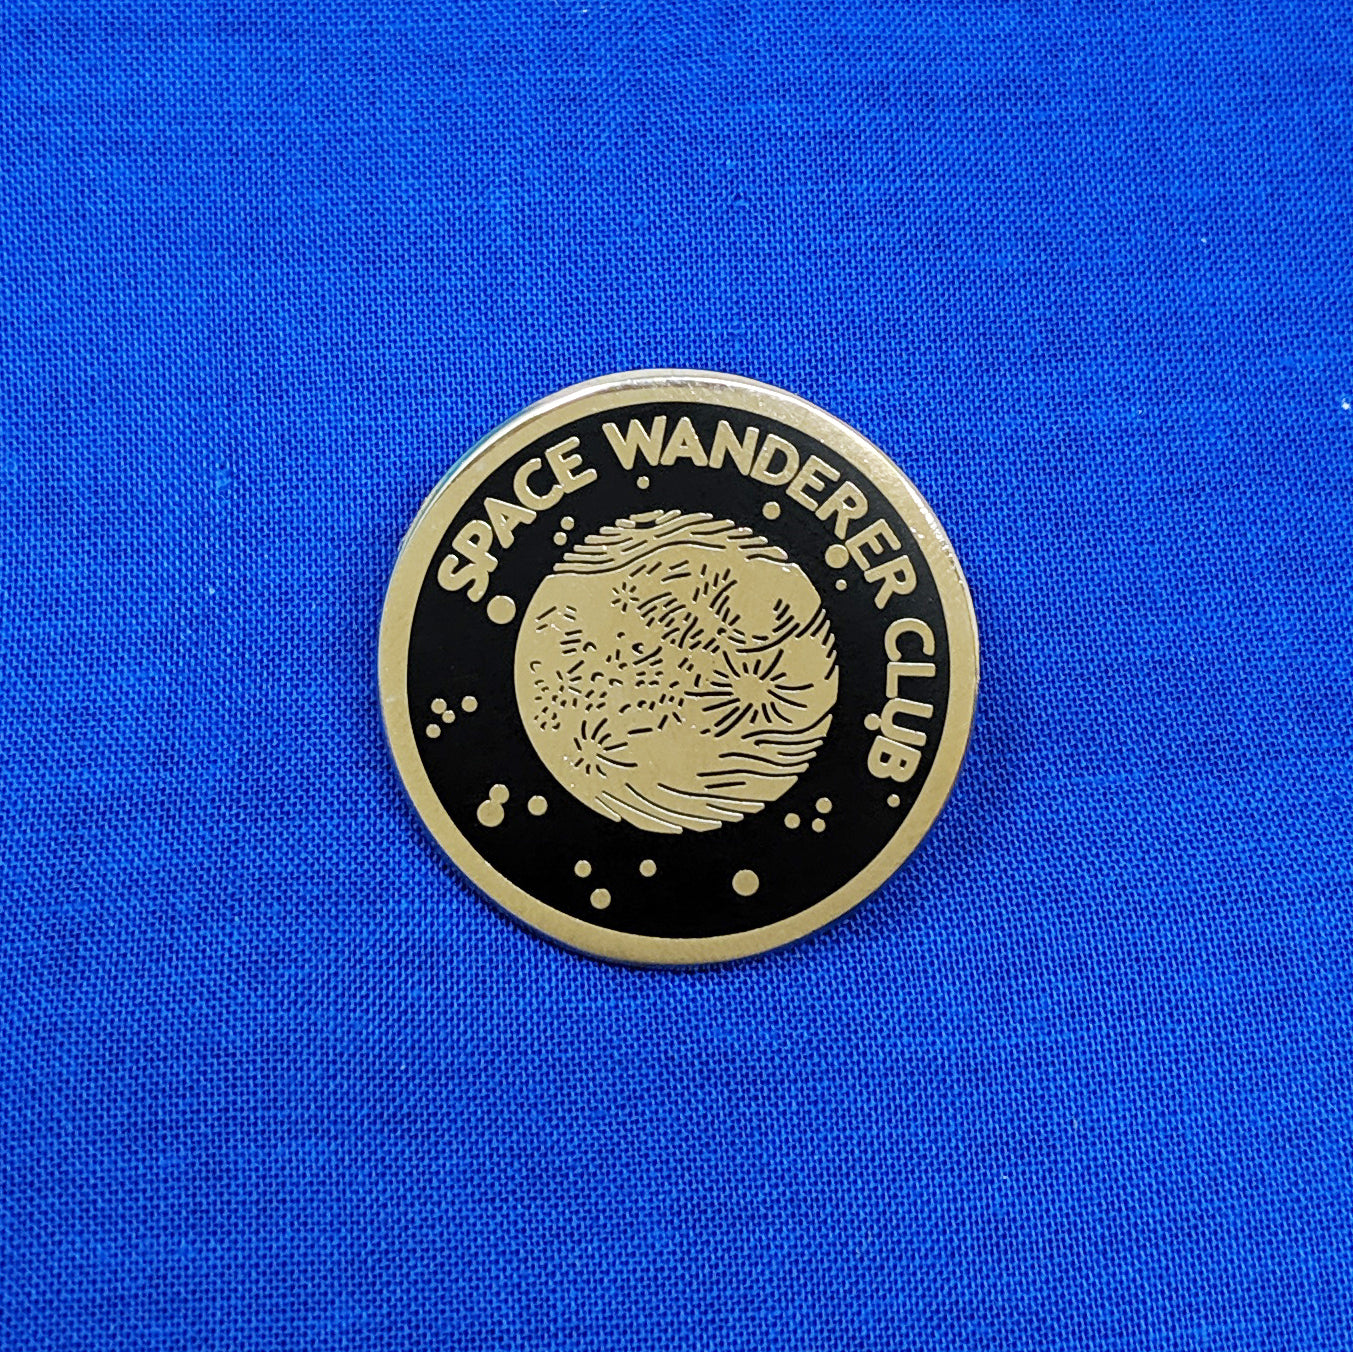 Pin on wanderer